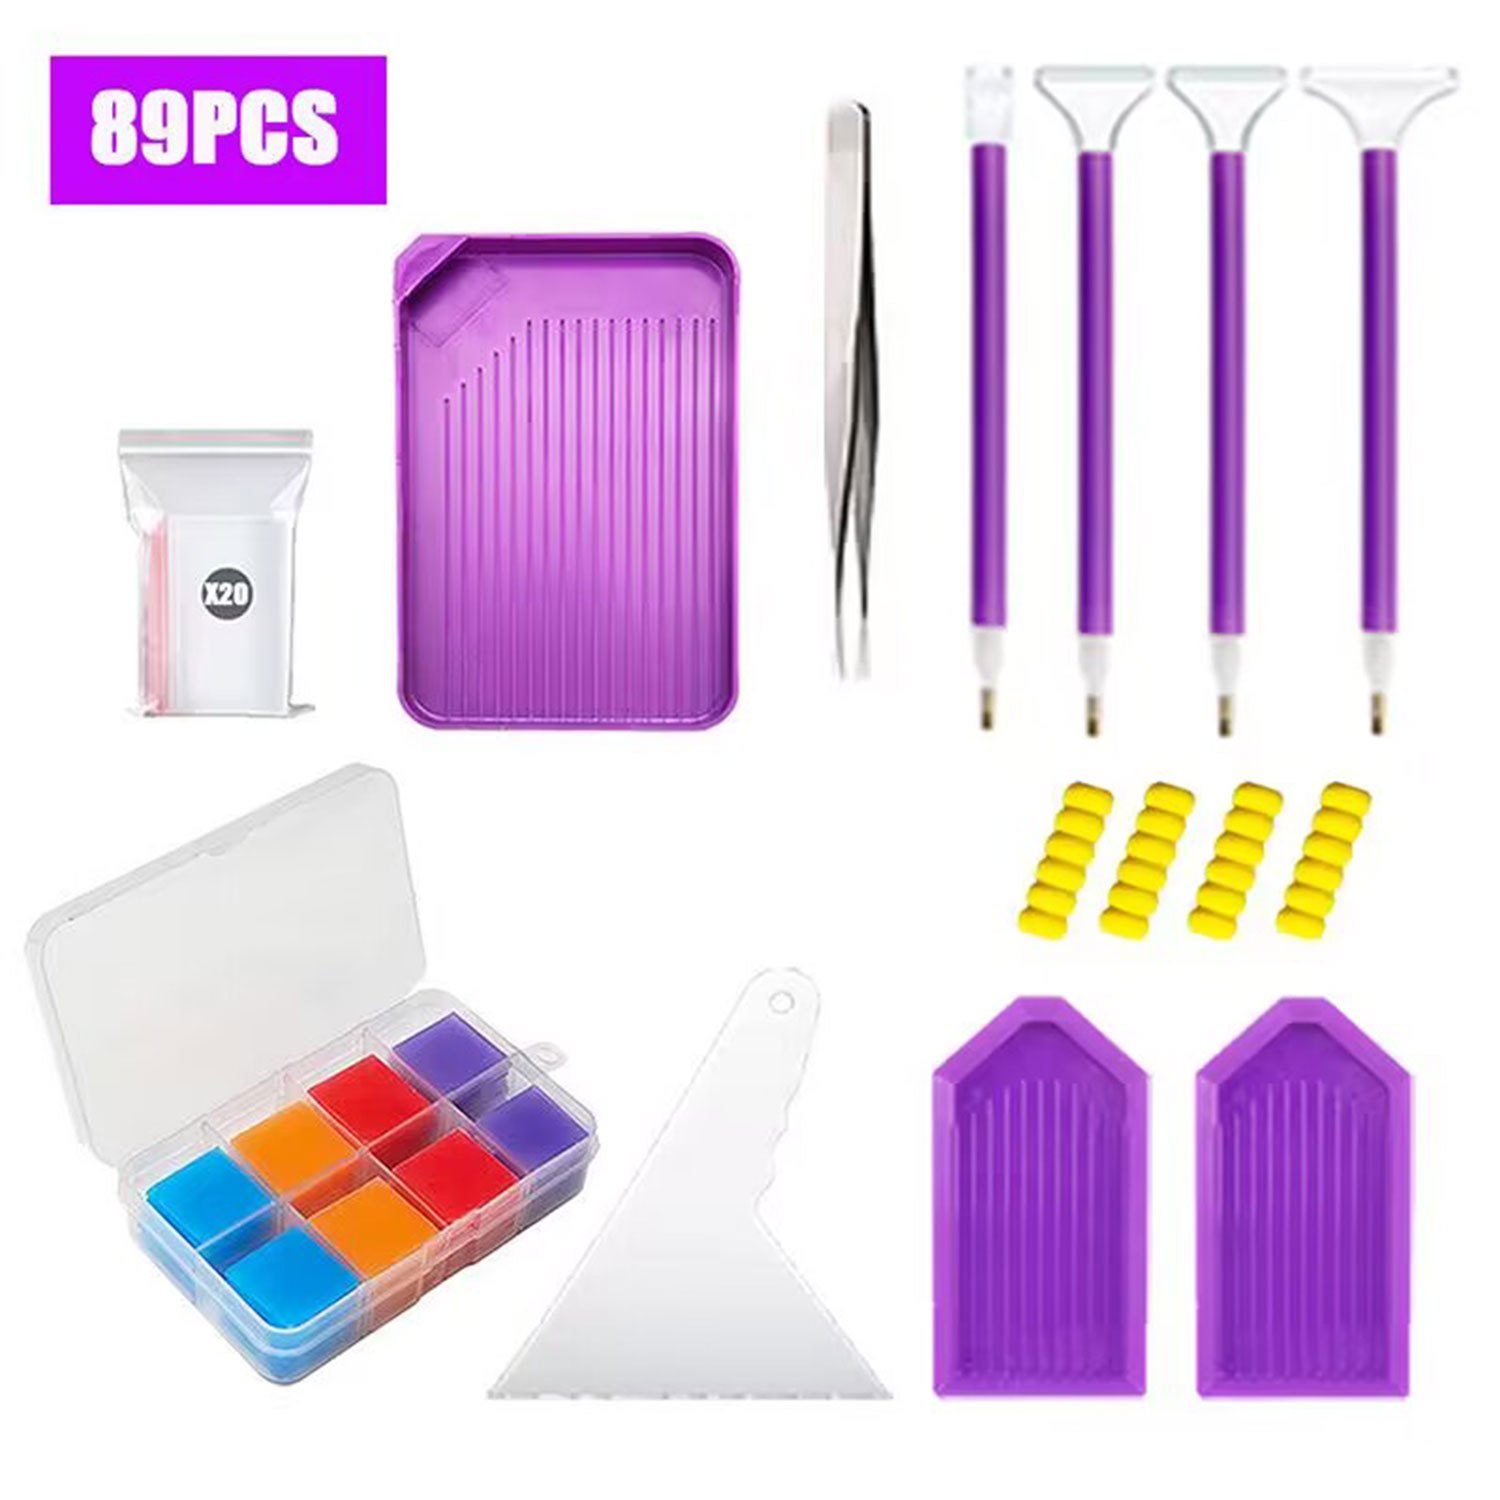 OUTUXED 117pcs 5D DIY Diamond Painting Tools and Accessories Kits with  Diamond Embroidery Box and Multiple Sizes Painting Pens for Adults to Make  Art Craft